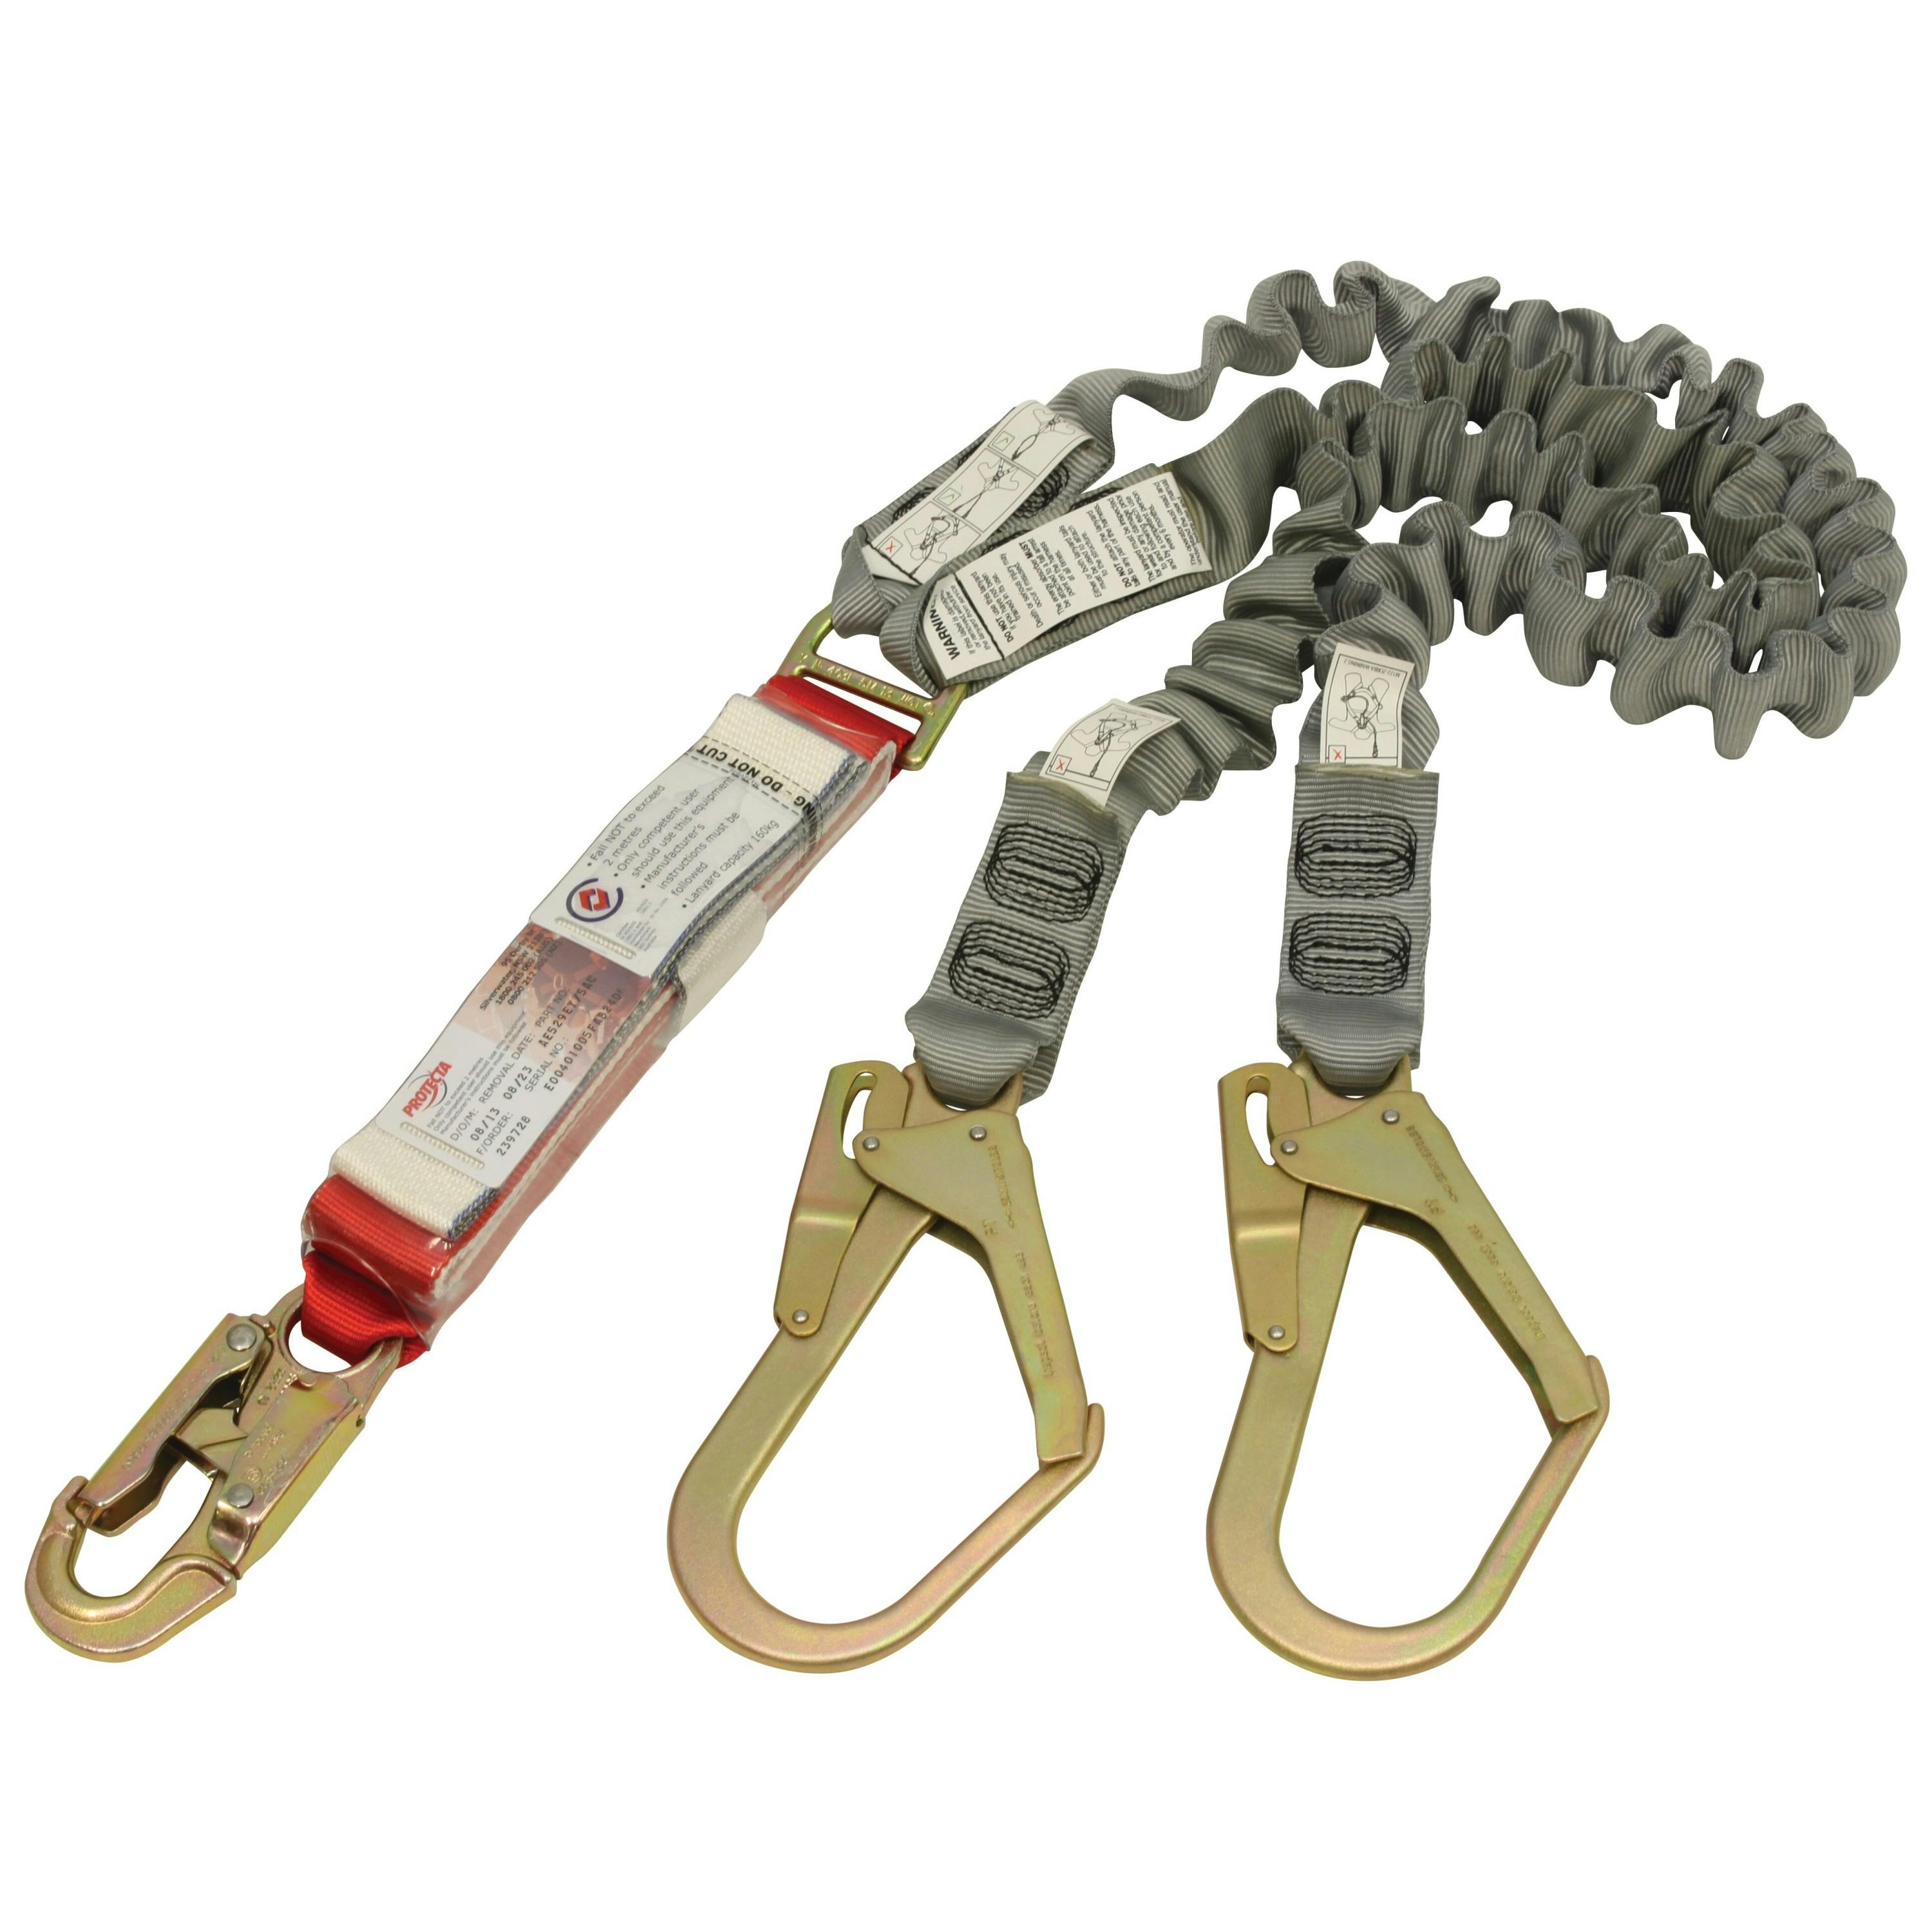 3M™ PROTECTA® Shock Absorbing Elasticated Webbing Lanyard - Double Tail AE529EY/5AU, Red/Grey, 1 EA/Case